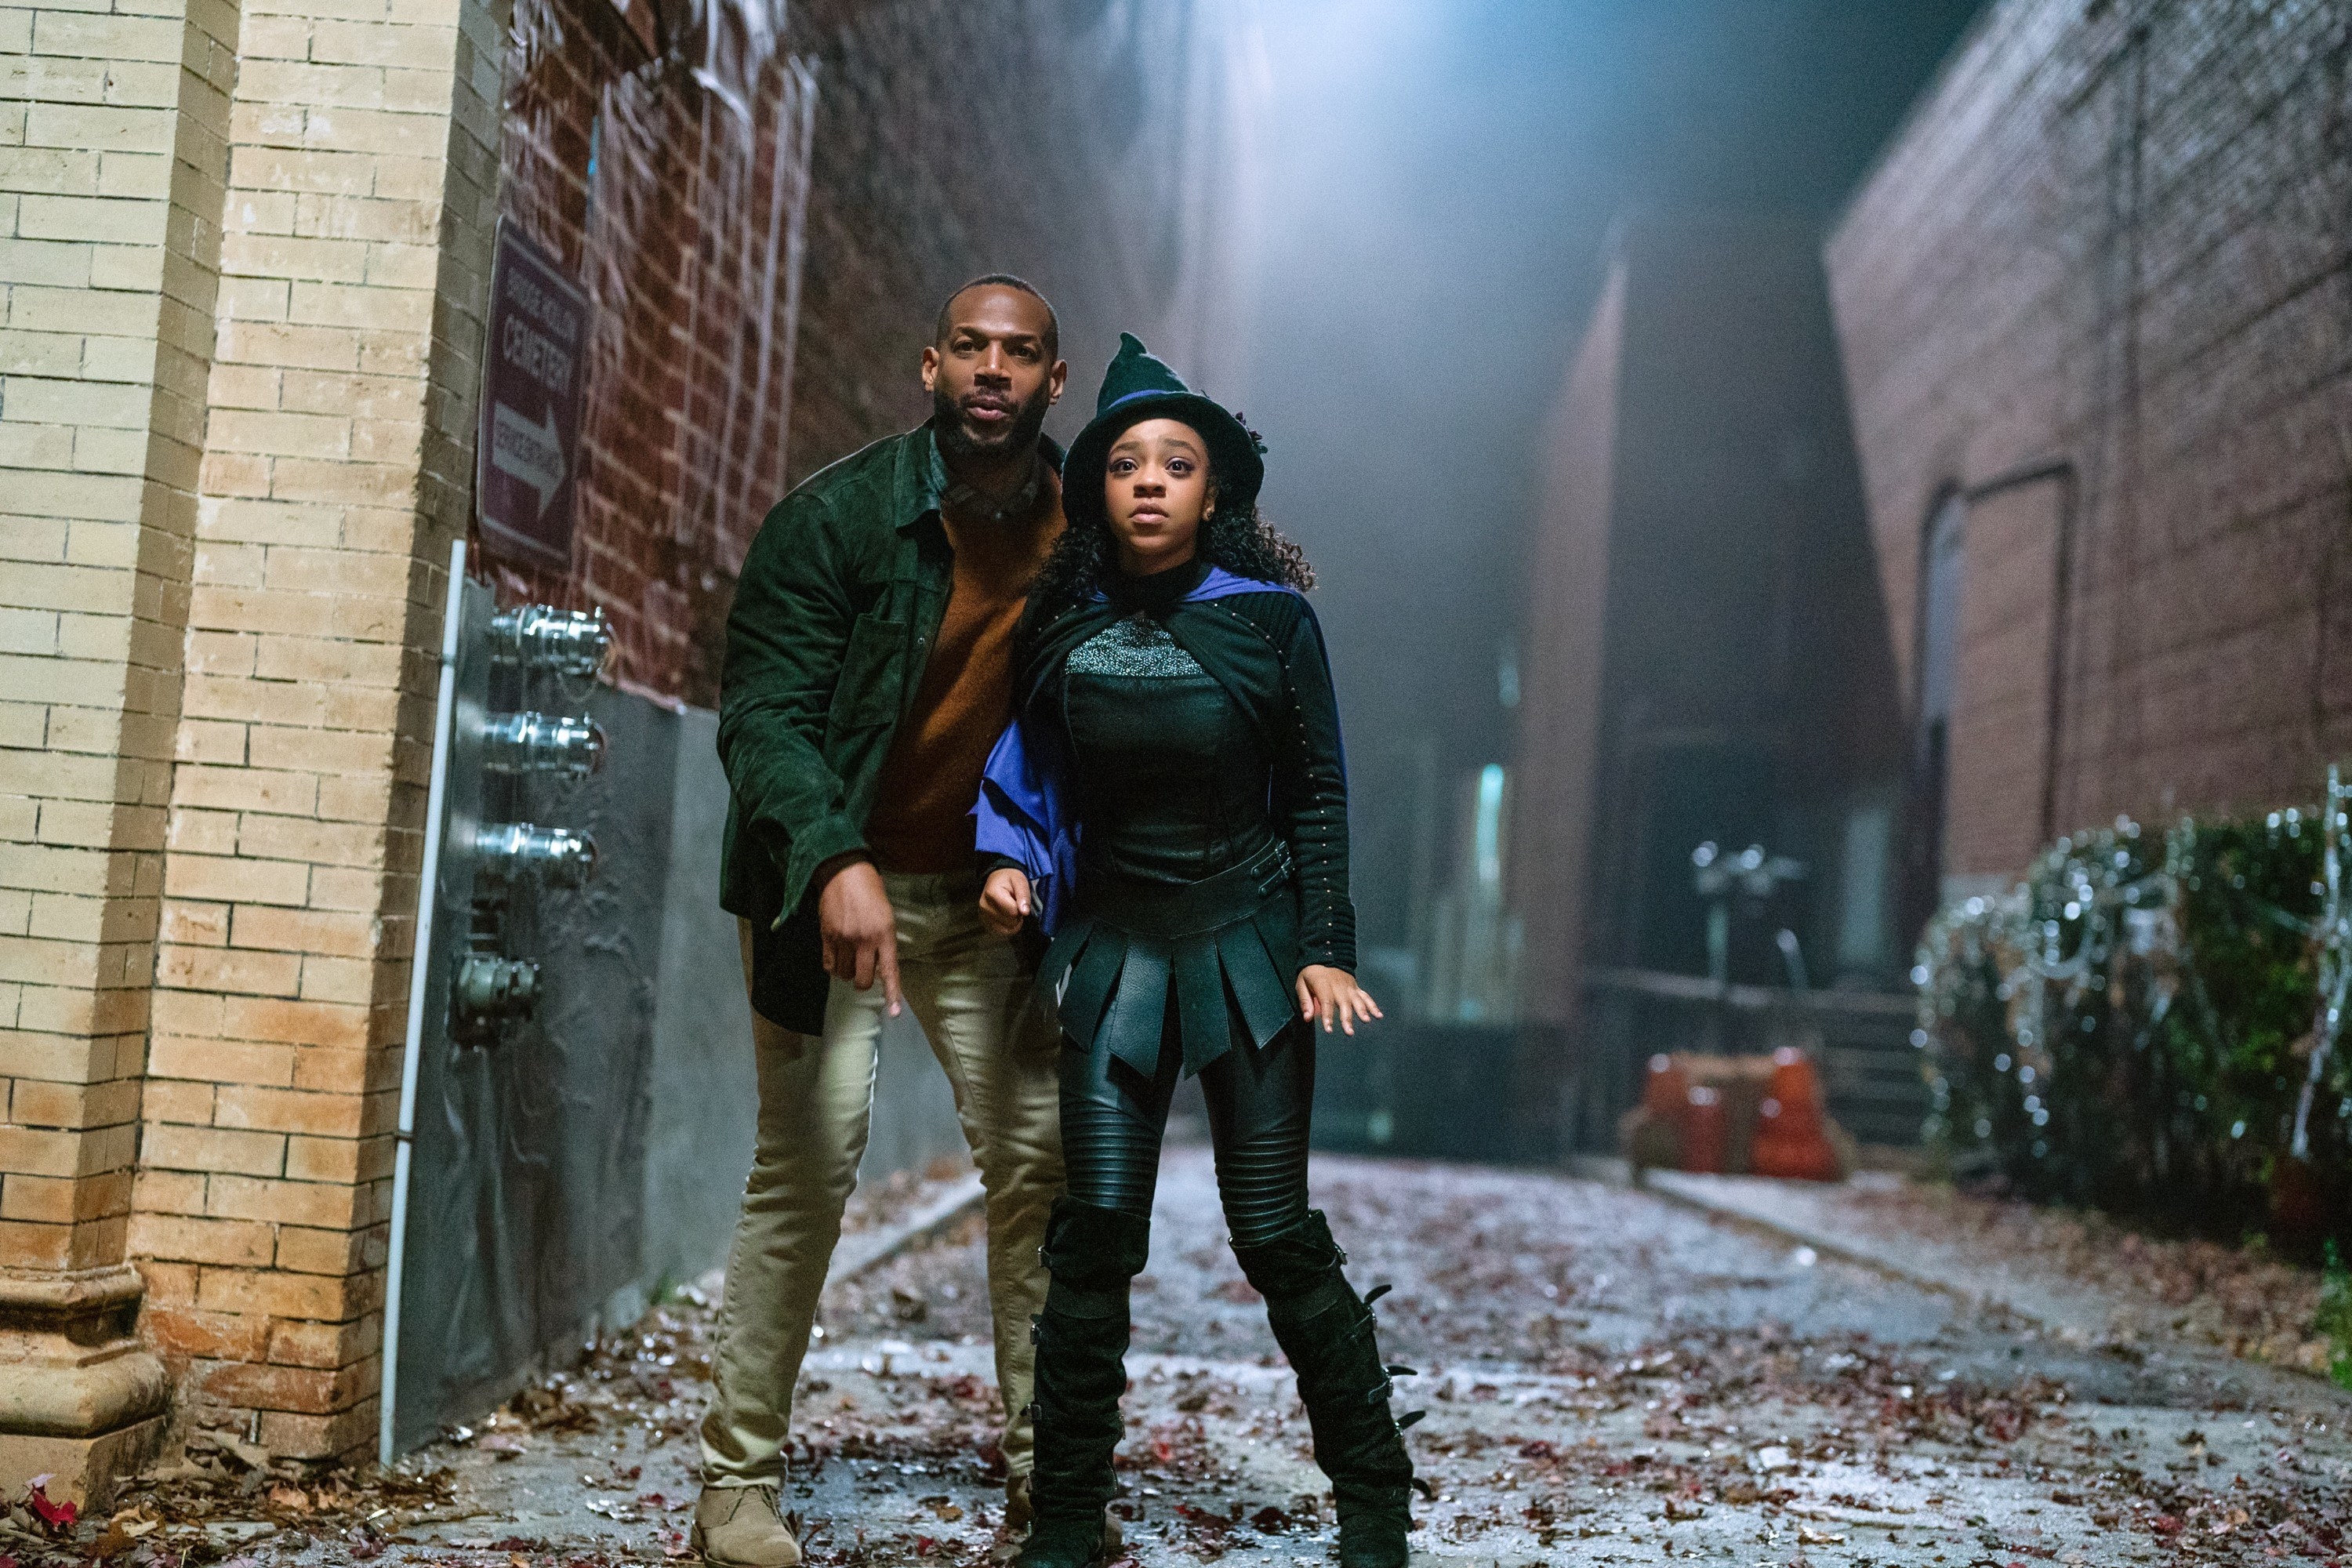 Marlon and Priah standing in a dark alleyway in a scene from the film